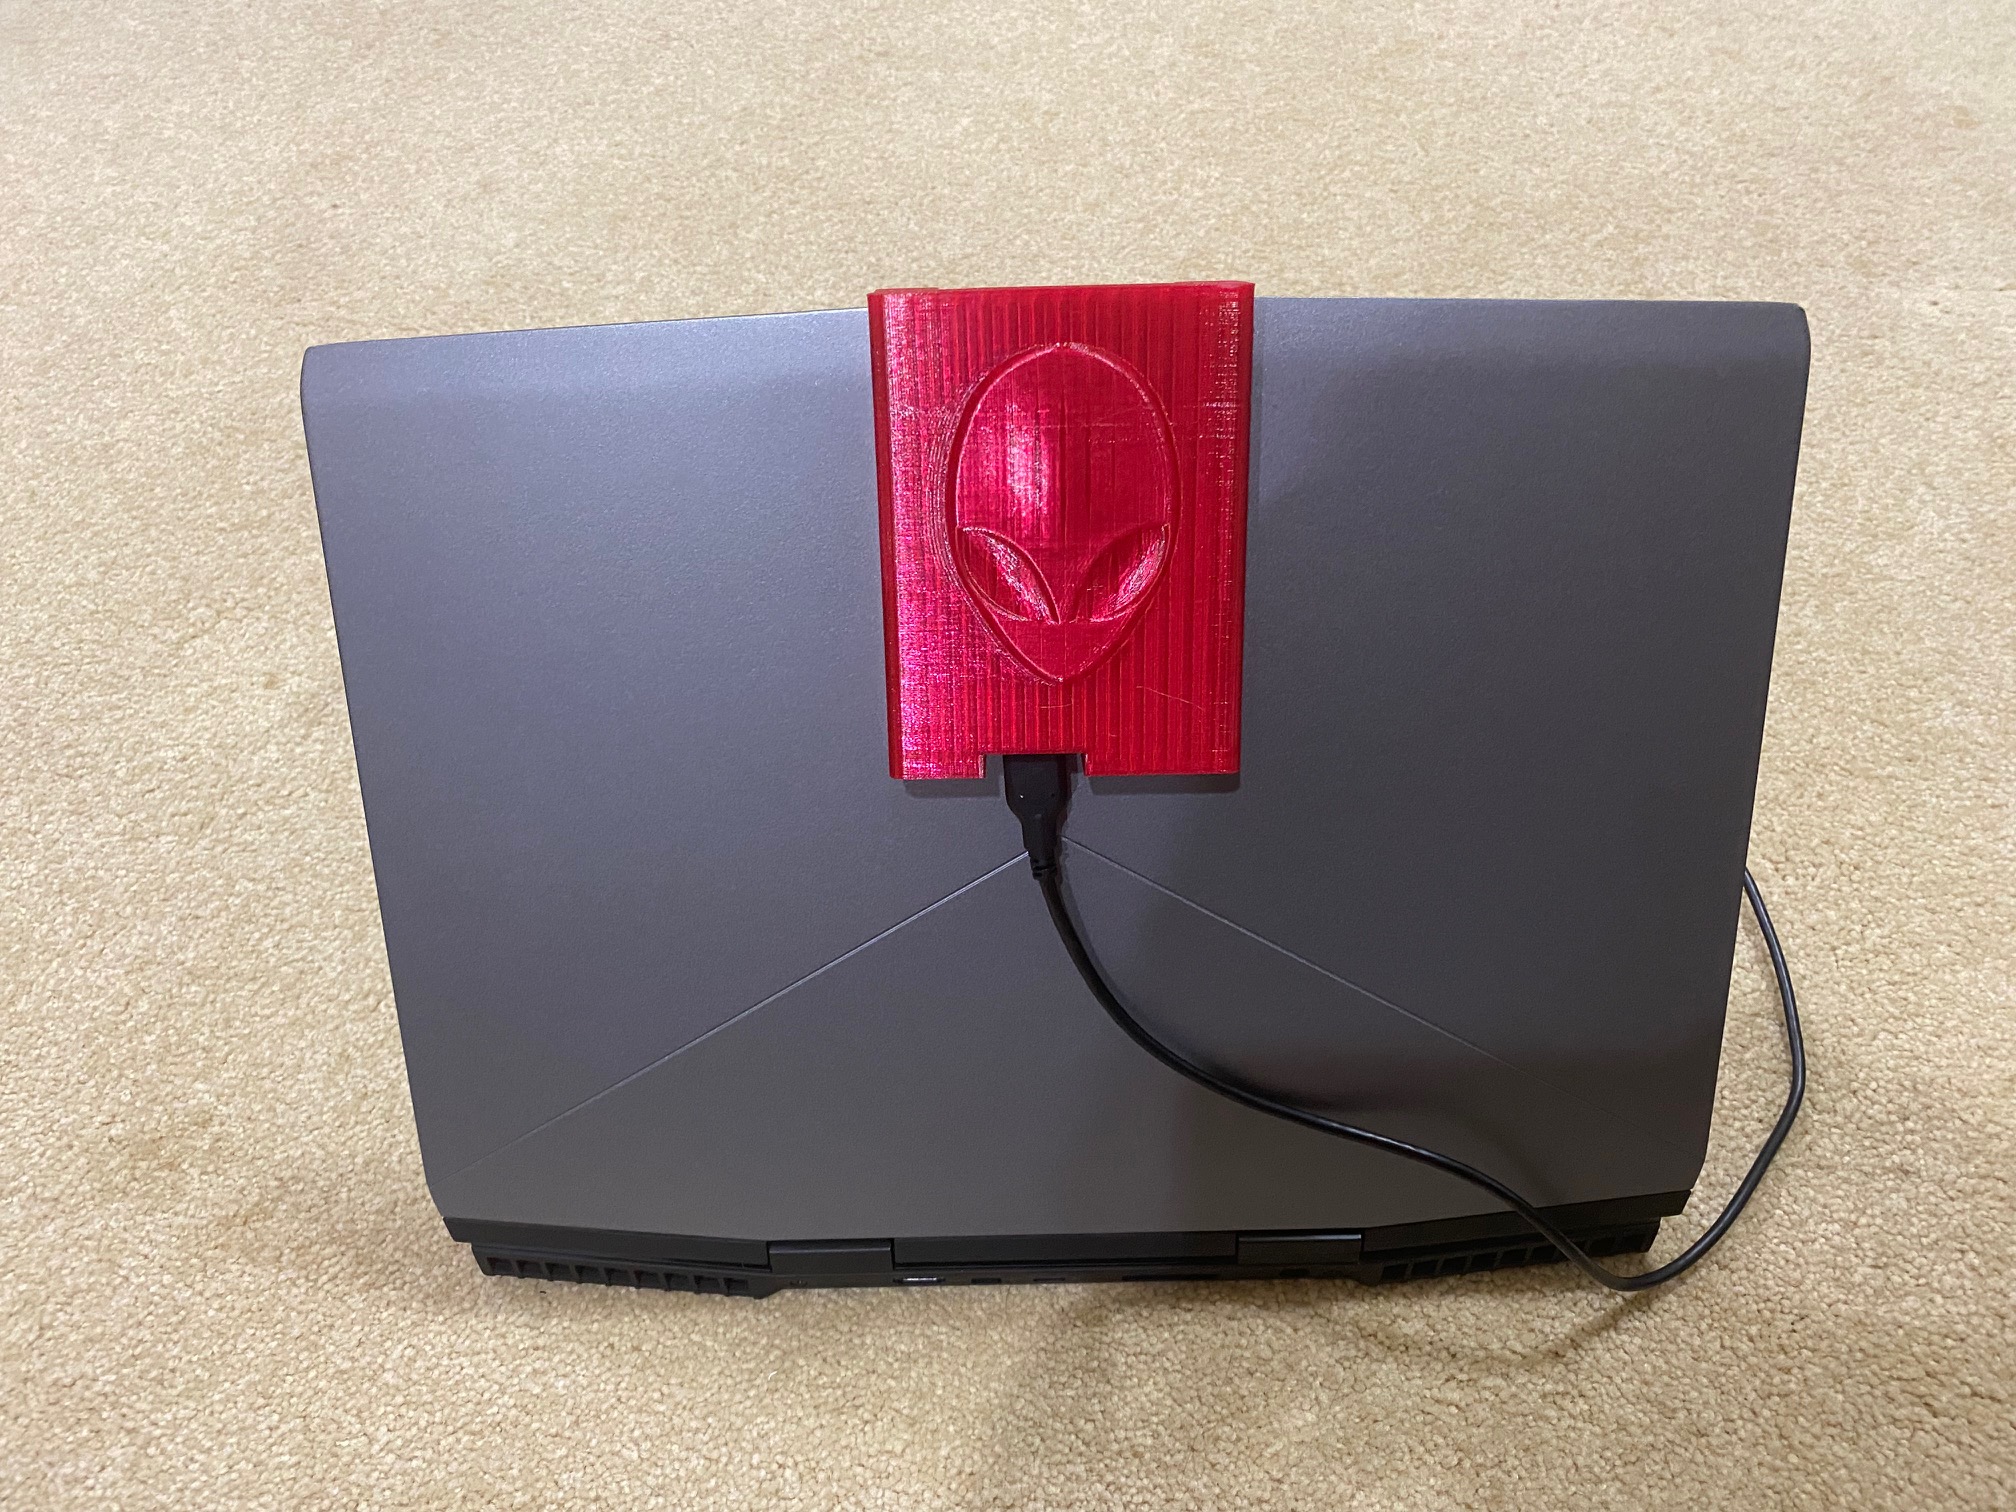 Toshiba HDD holder for Alienware laptop